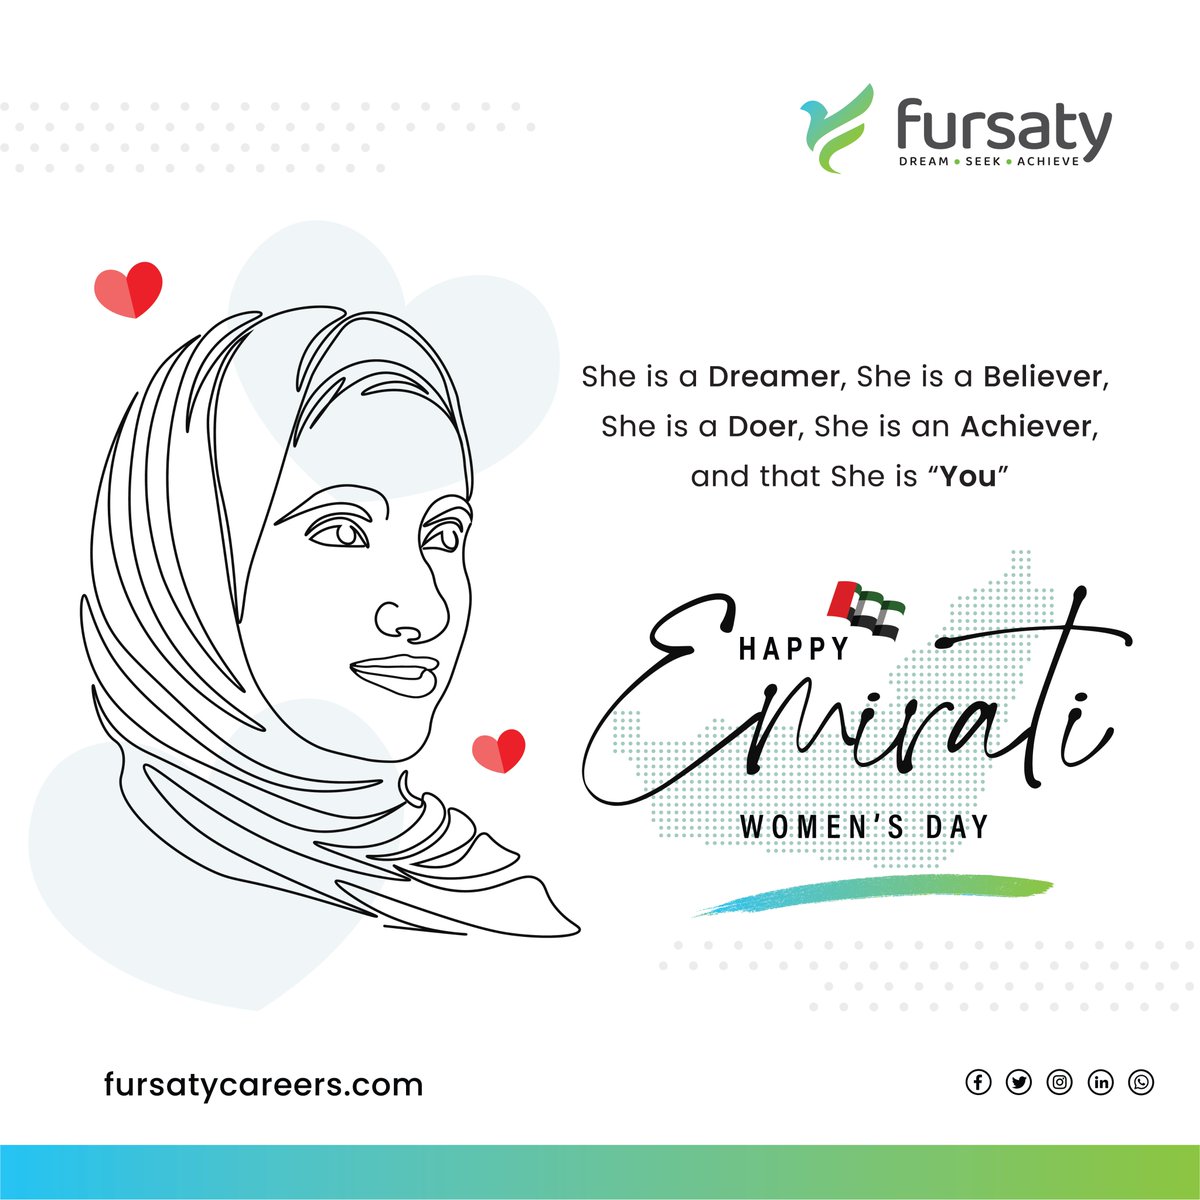 ✨ Celebrating the strength, grace, and achievements of Emirati women on this special day. Happy Emirati Women's Day! 🇦🇪

#EmiratiWomensDay #InspiringWomen #CelebrateWomen #EmpowermentThroughUnity